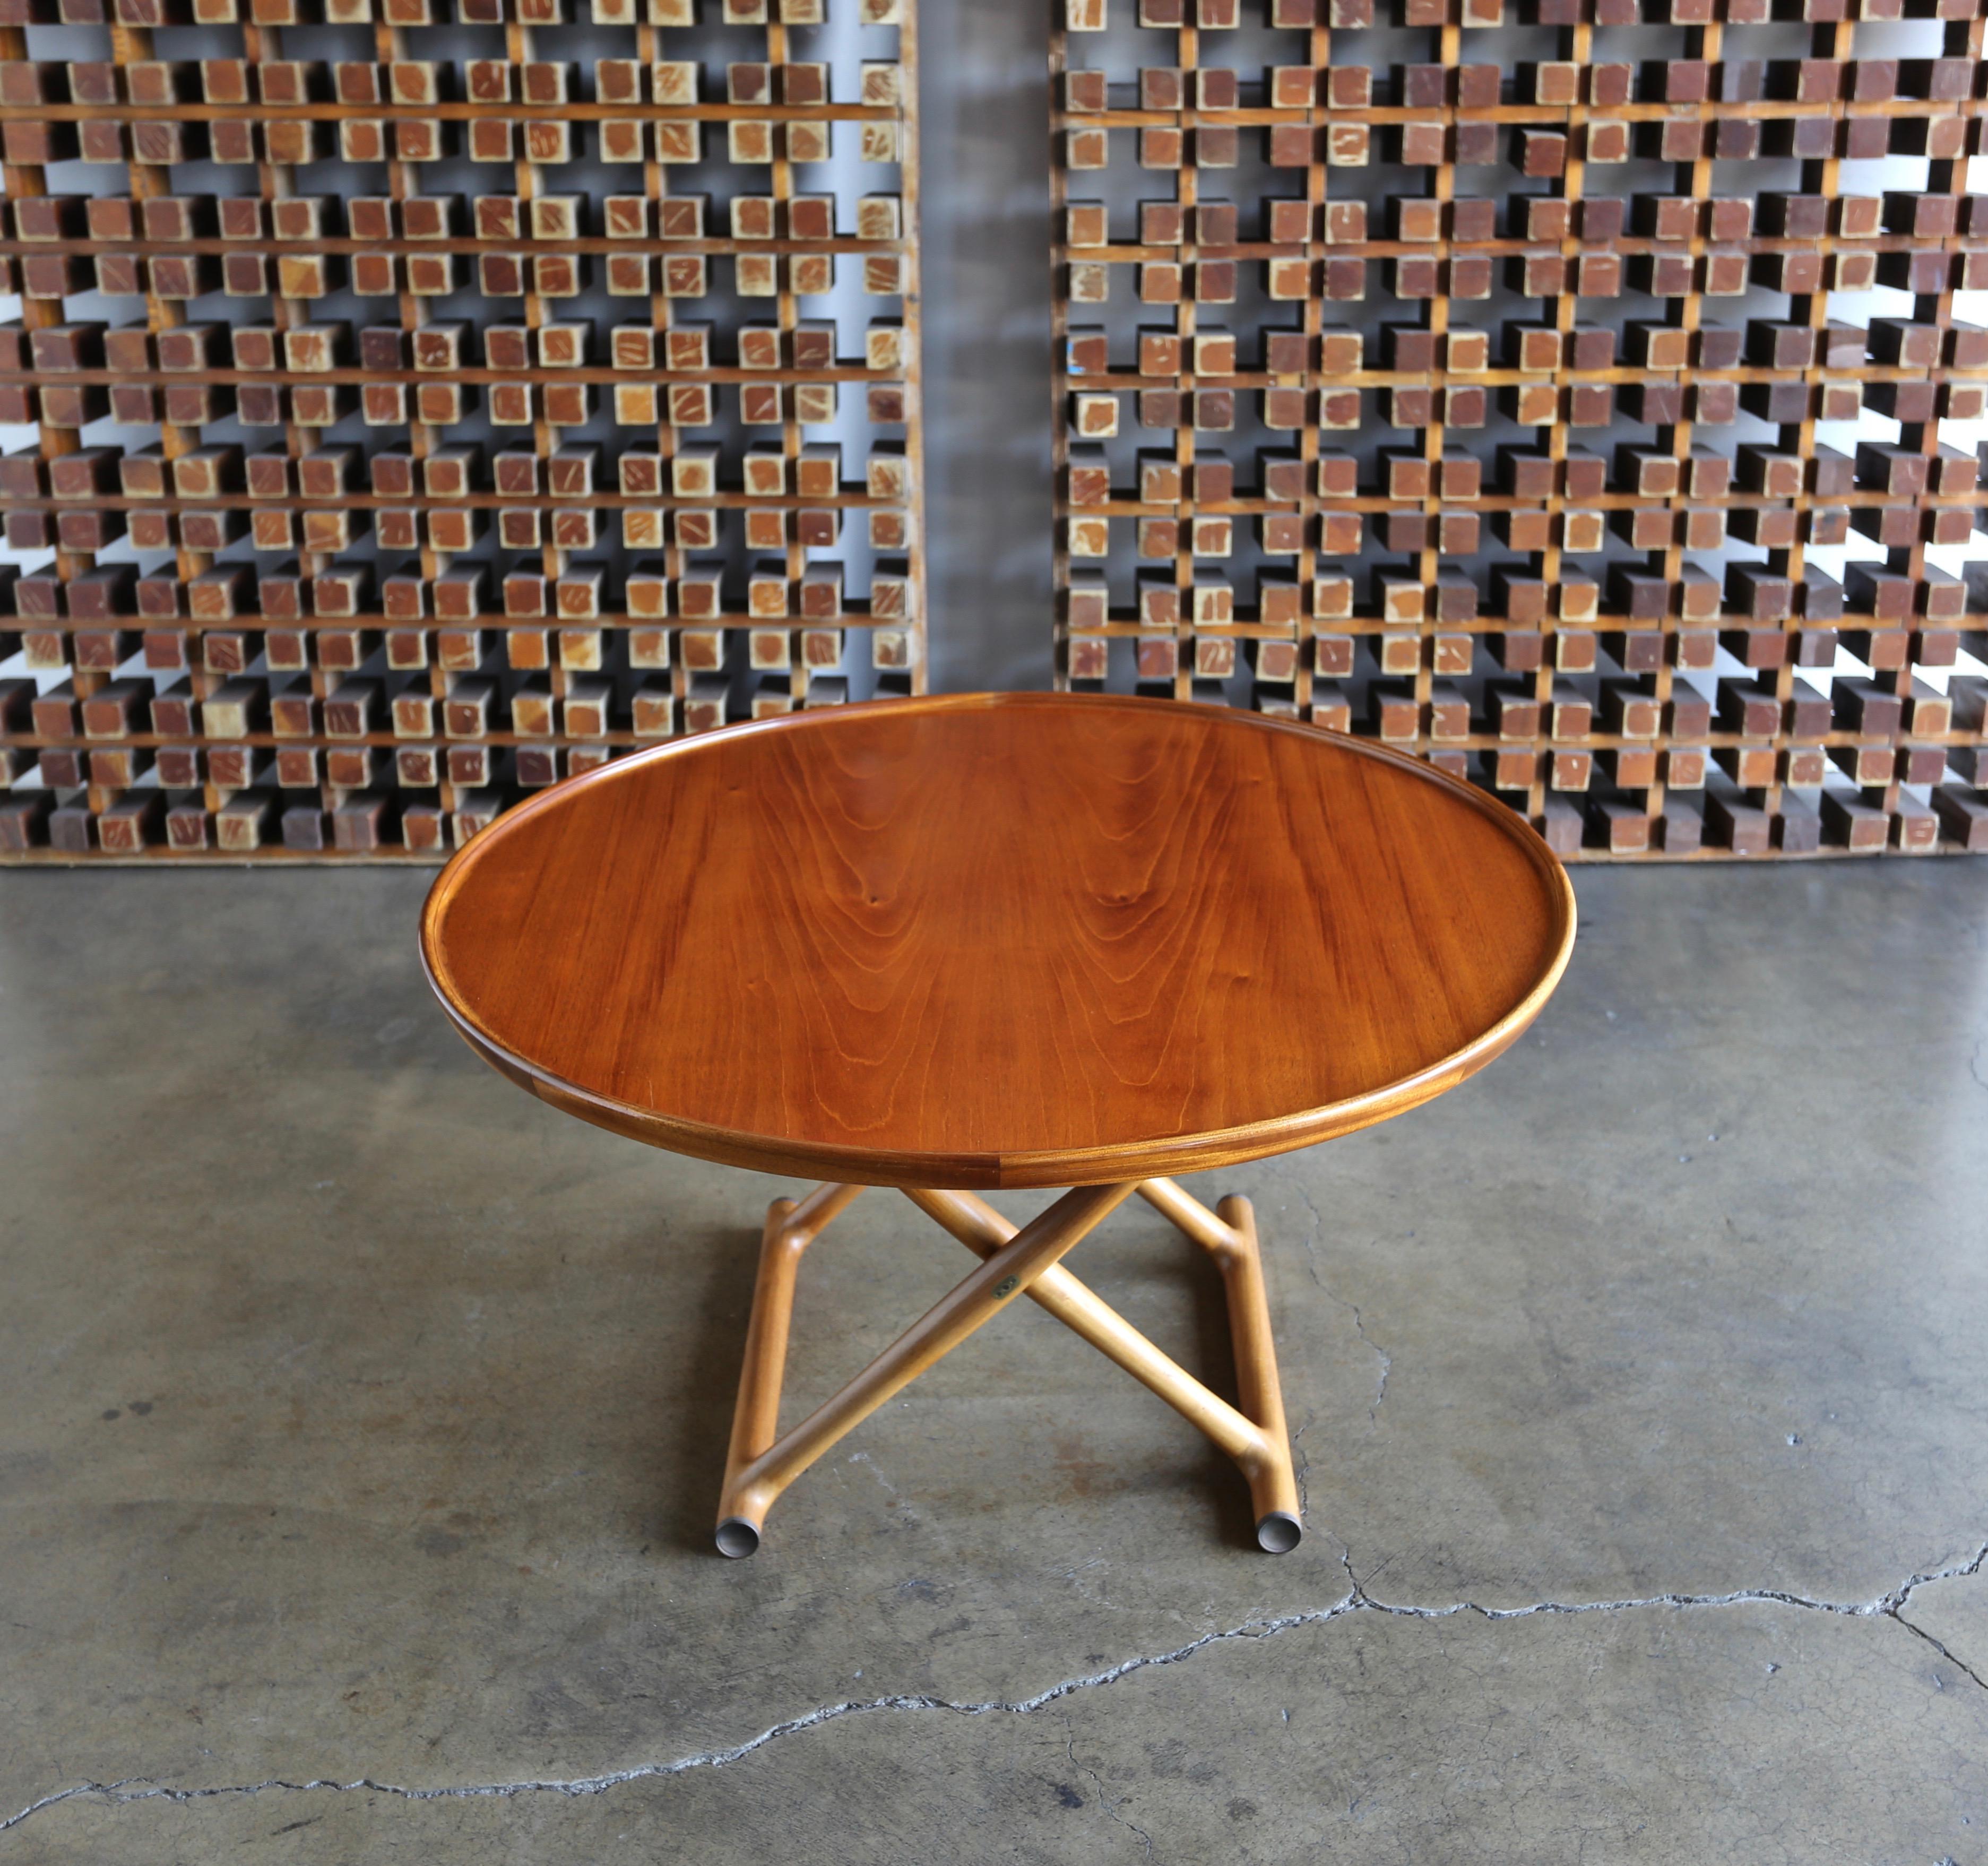 Large Egyptian table by Mogens Lassen for A.J. Iversen, circa 1955.